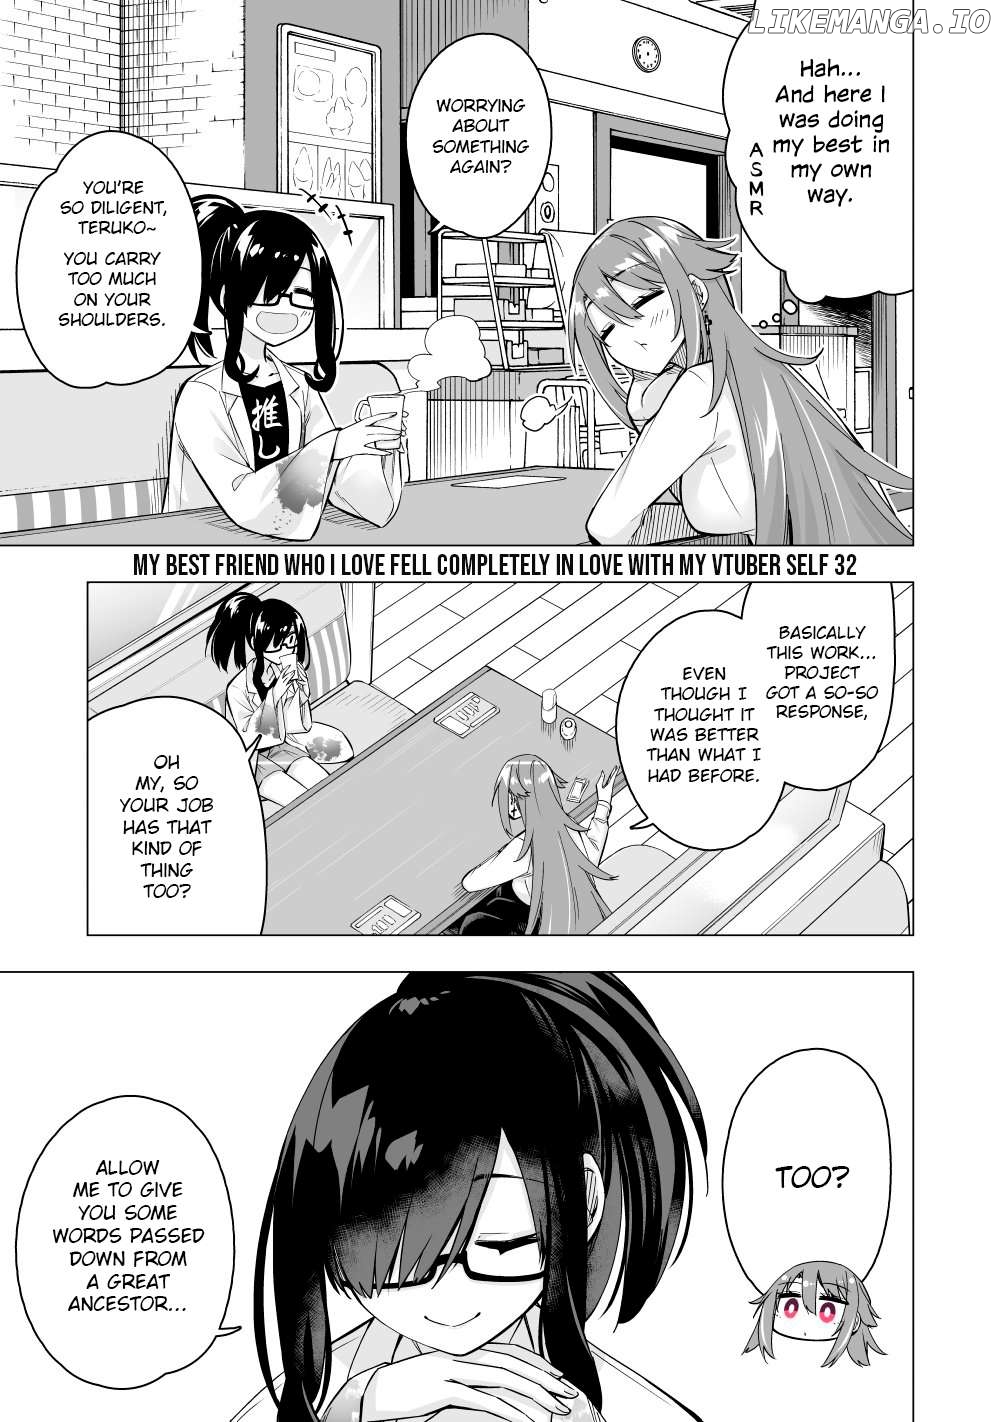 My Best Friend Who I Love Fell Completely In Love With My Vtuber Self chapter 32 - page 1